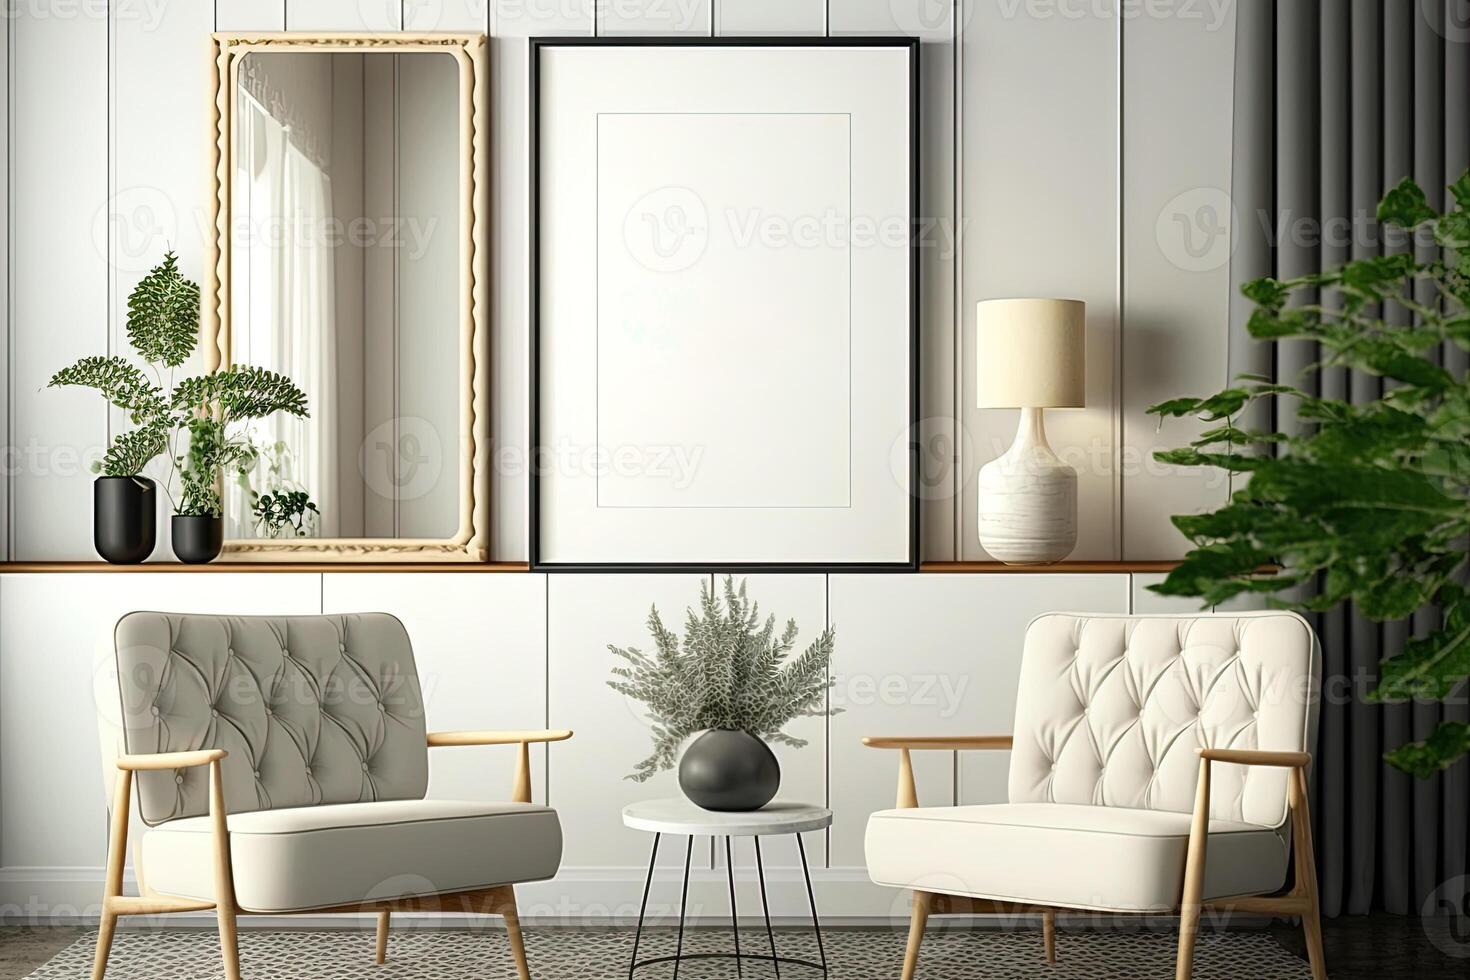 Two Vertical Blank Picture Frame Mockup on The Wall, Mid Century Living Room - . Blank picture frame mockup on wall in modern interior. Artwork template mock up in interior design. photo